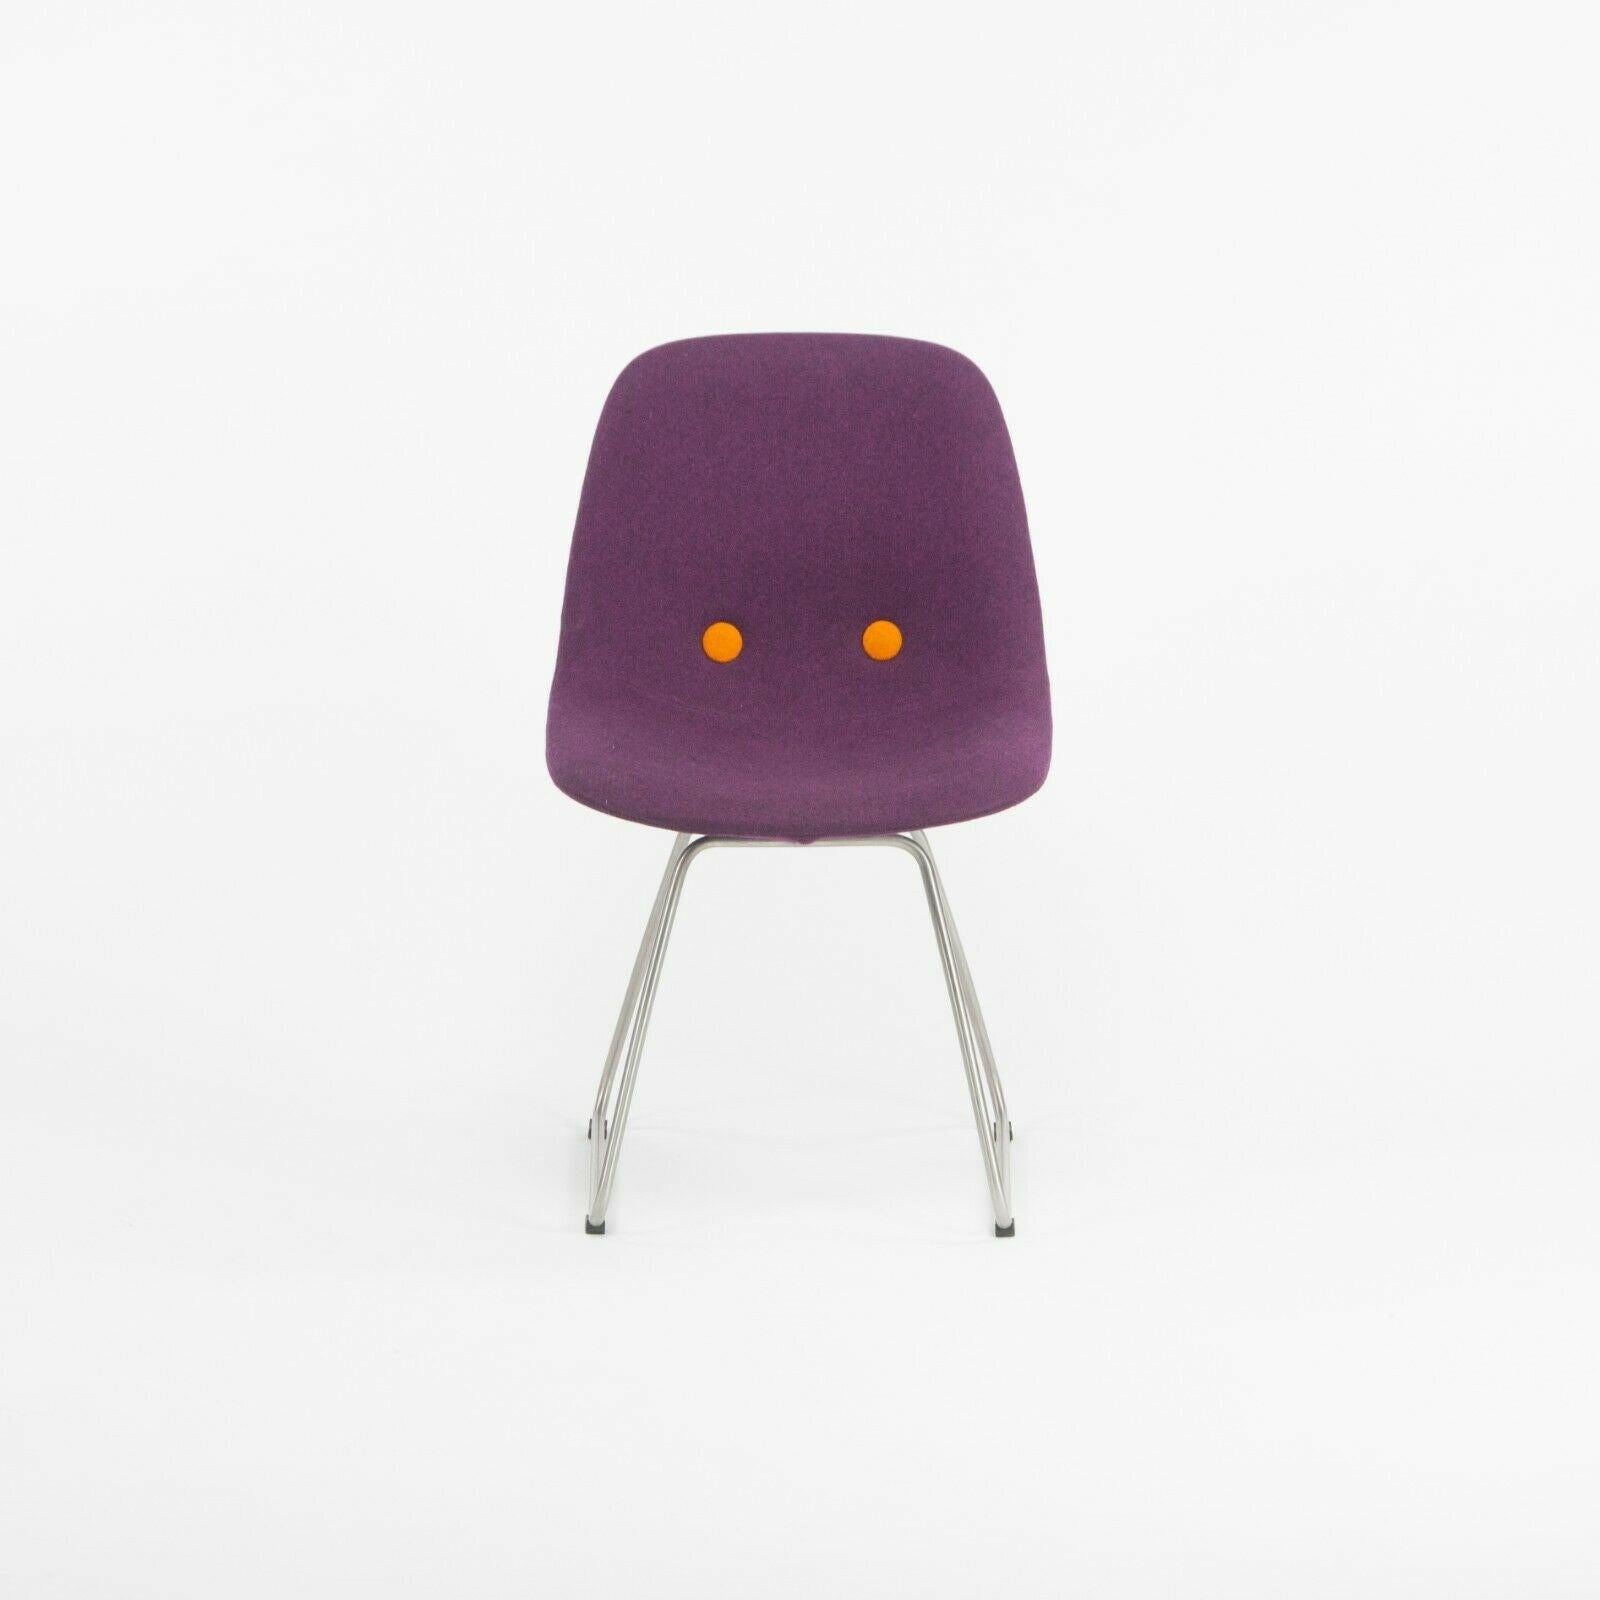 Listed for sale is a set of six Erik Jorgensen EJ 2 Eyes Chair by Foersom + Hiort-Lorenzen. These chairs are beautifully upholstered in a purple Kvadrat wool material with contrasting orange buttons. The chairs appear to have been only minimally